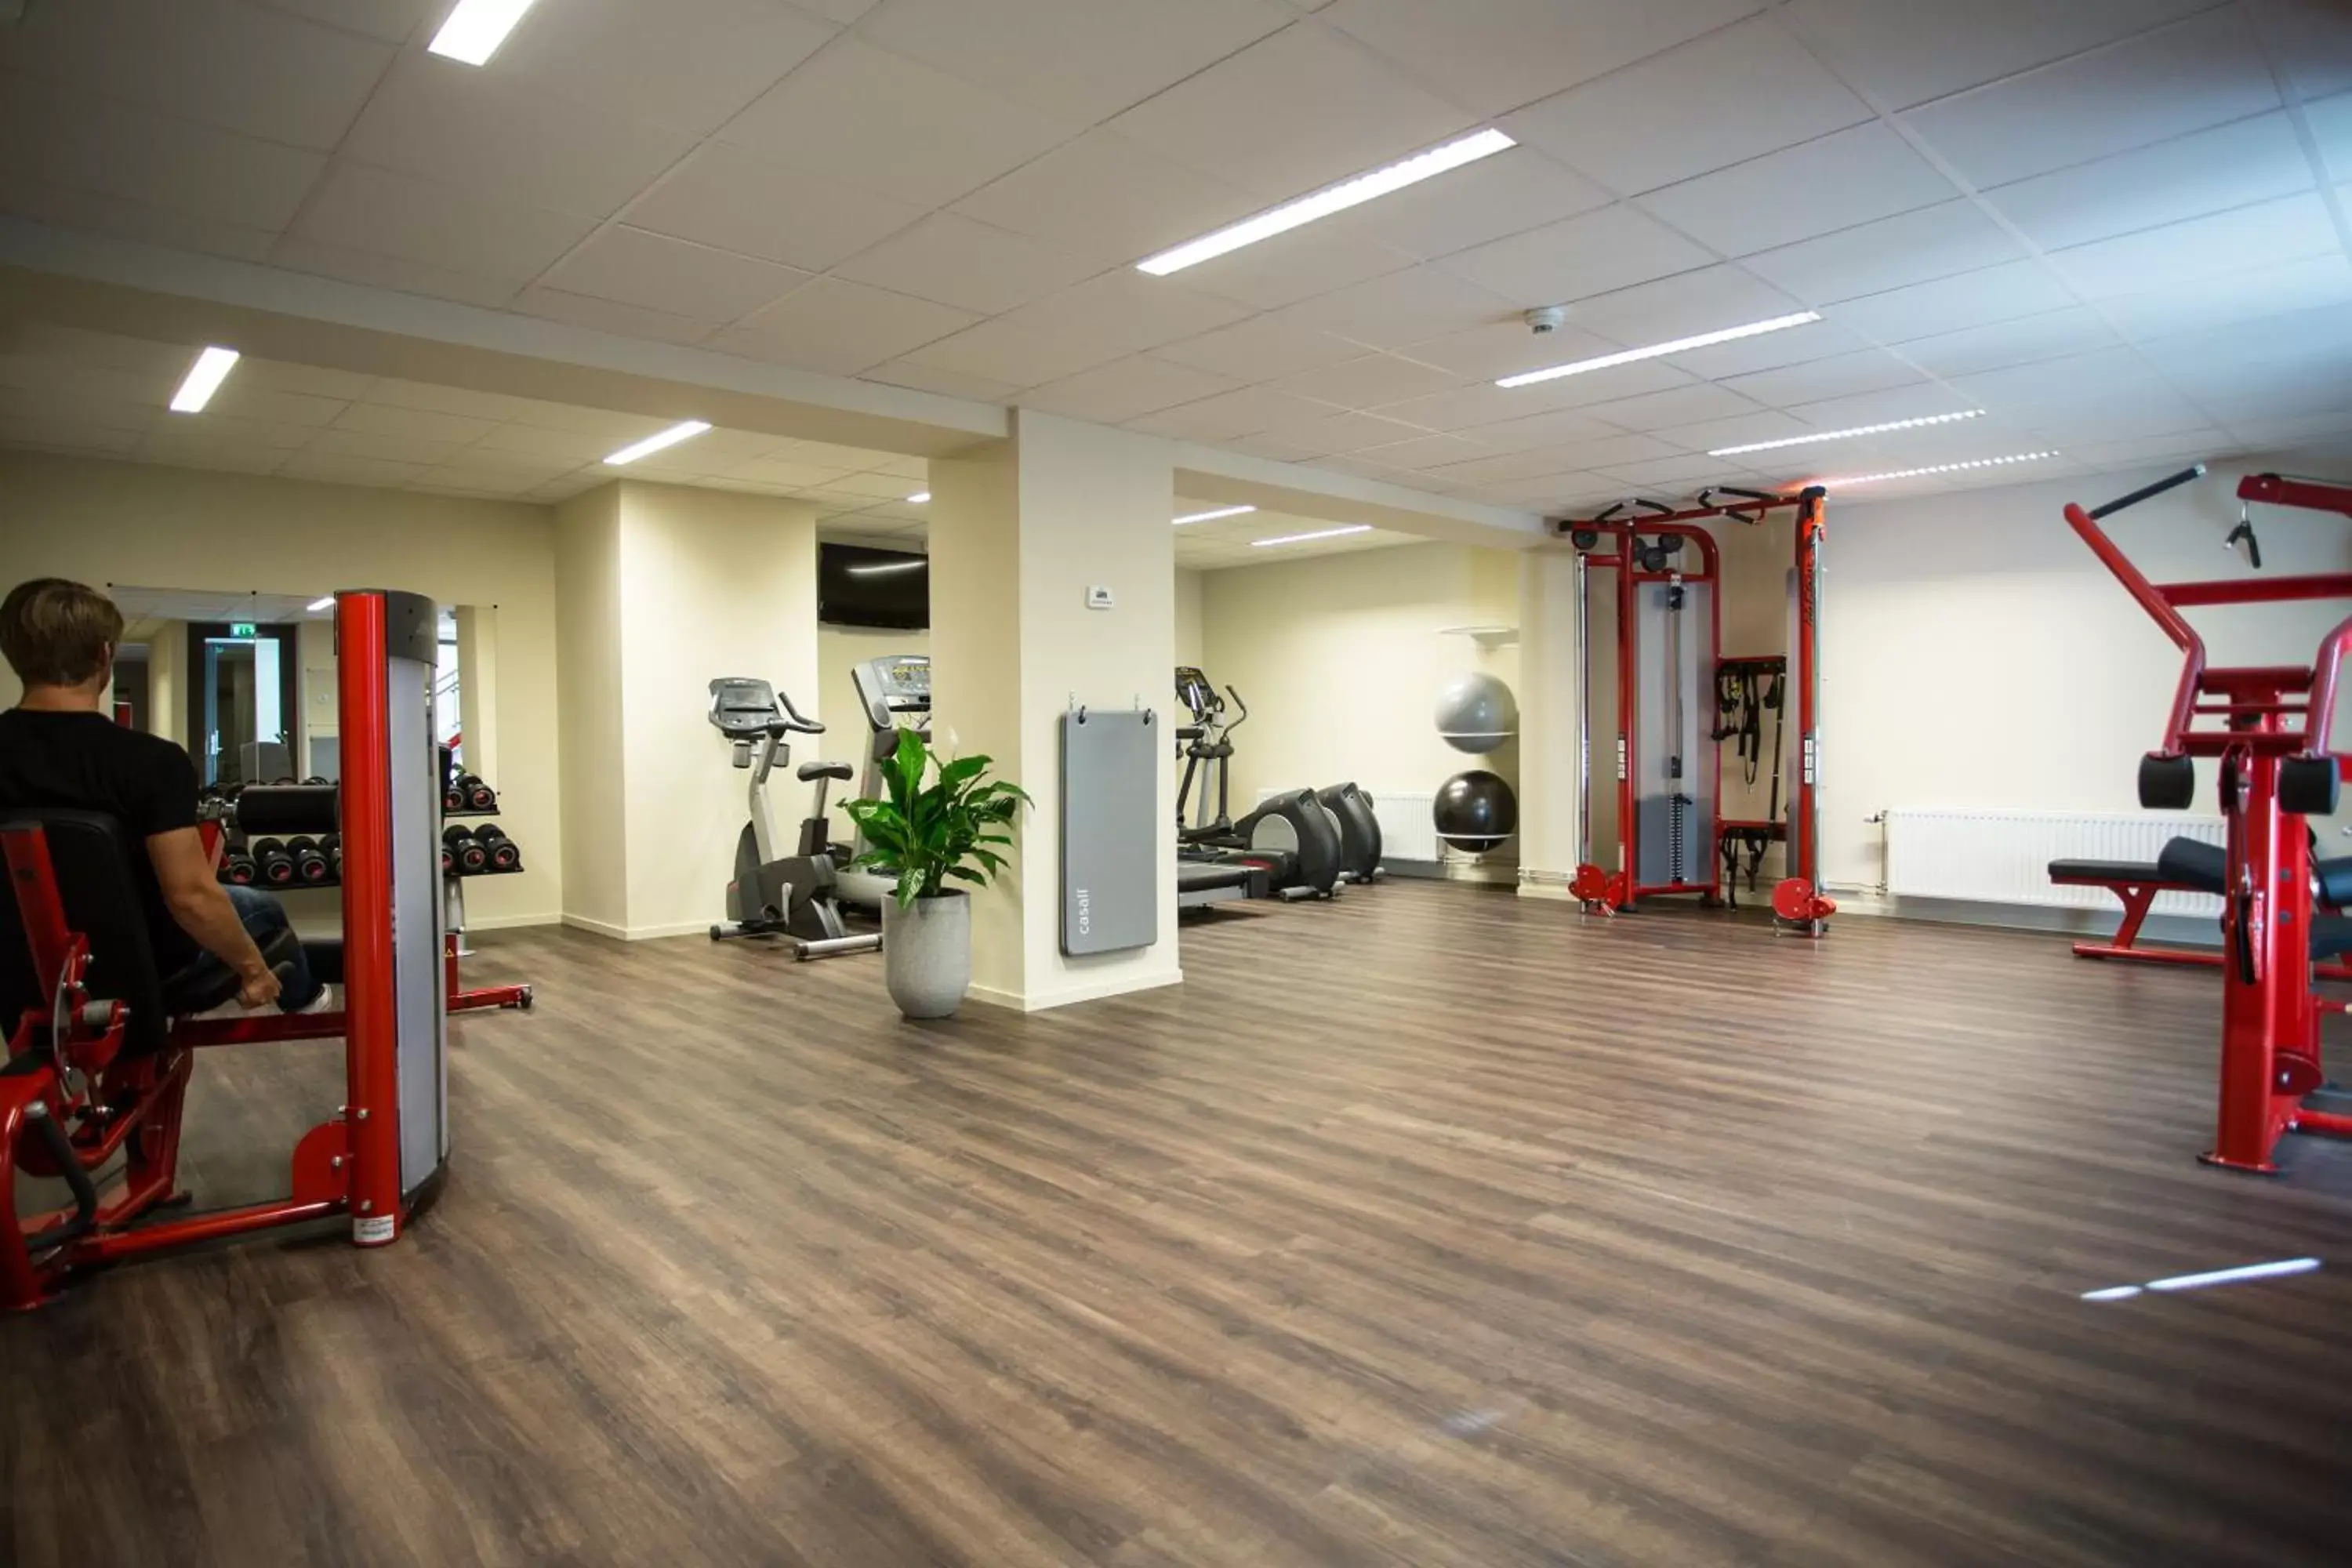 Fitness centre/facilities, Fitness Center/Facilities in Best Western Plus Savoy Lulea